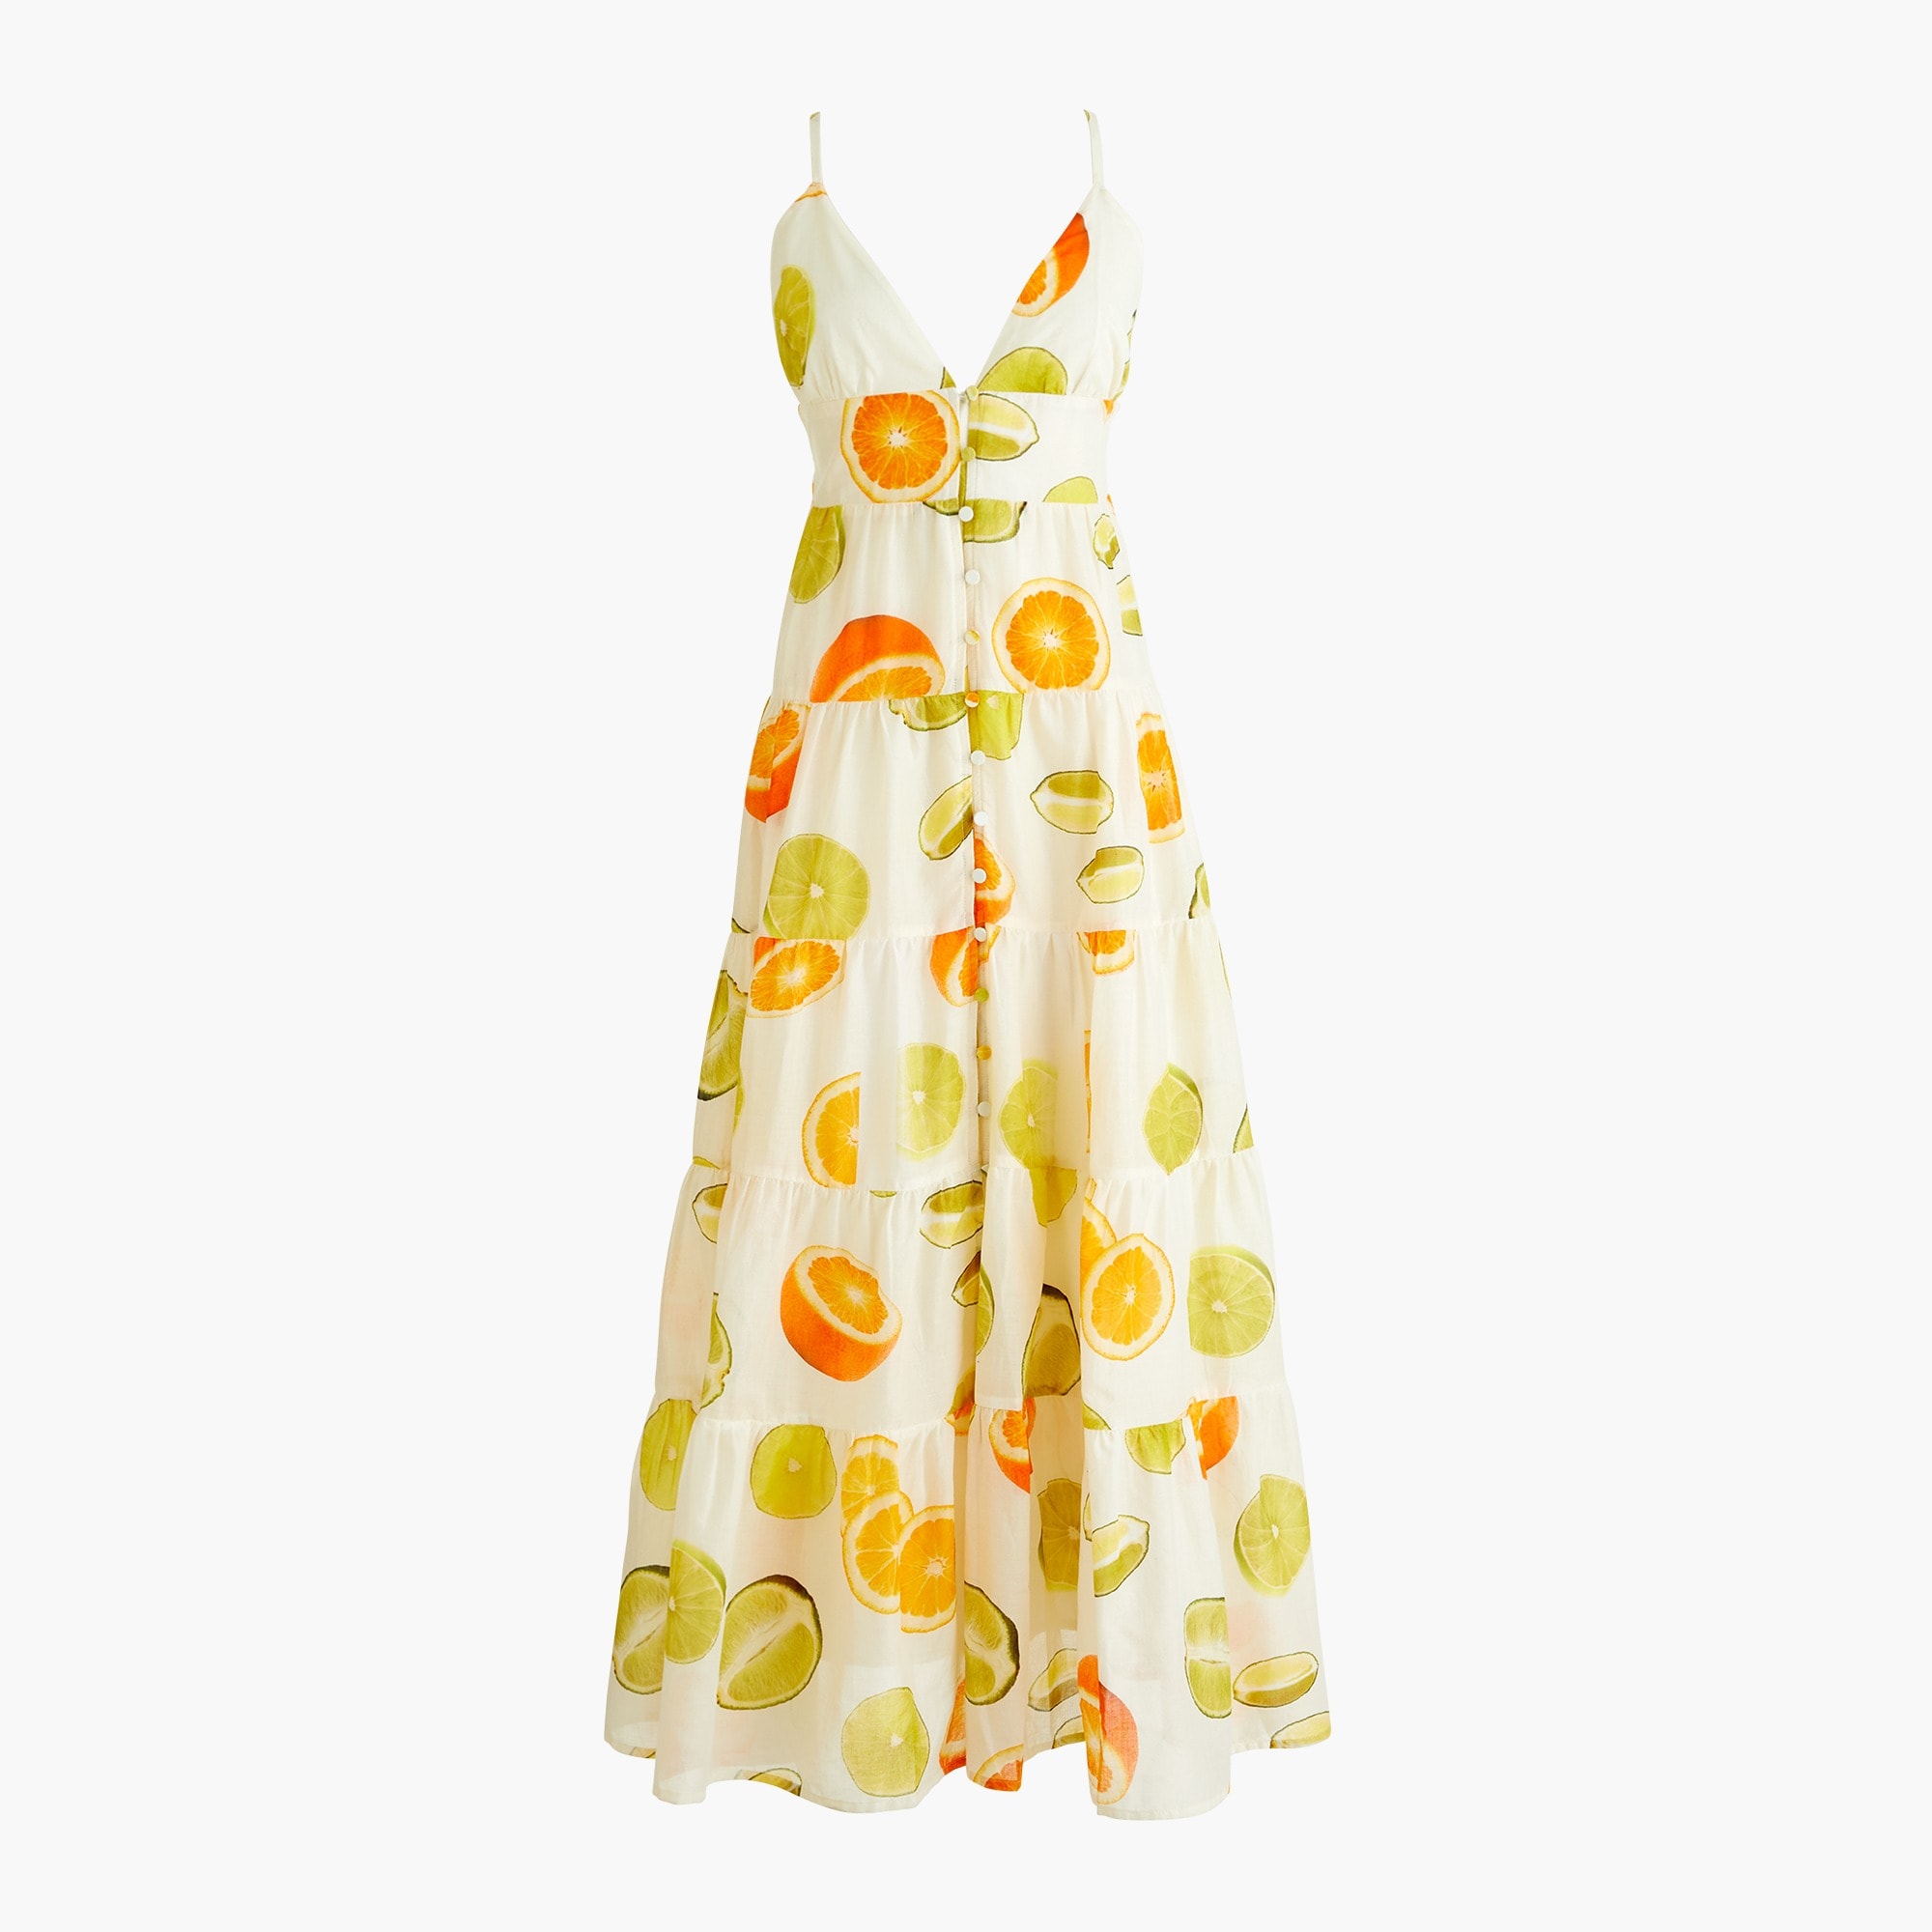 dress with oranges on it